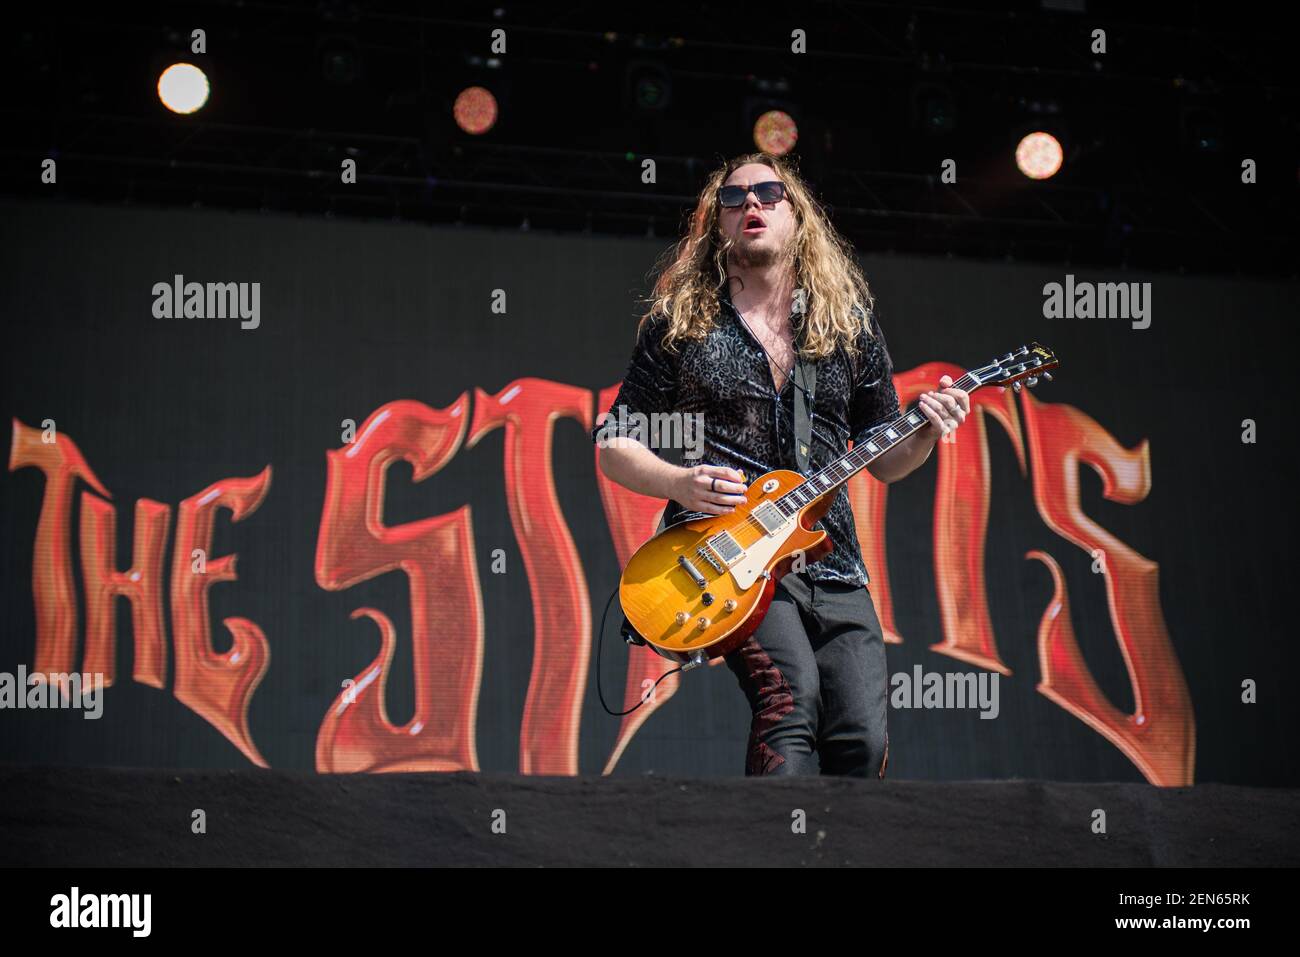 Adam Slack, guitarist of the English band The Struts, performing live on  stage at the Firenze Rocks festival 2019 in Florence, Italy on June 15,  2019. The Struts are opening for Eddie